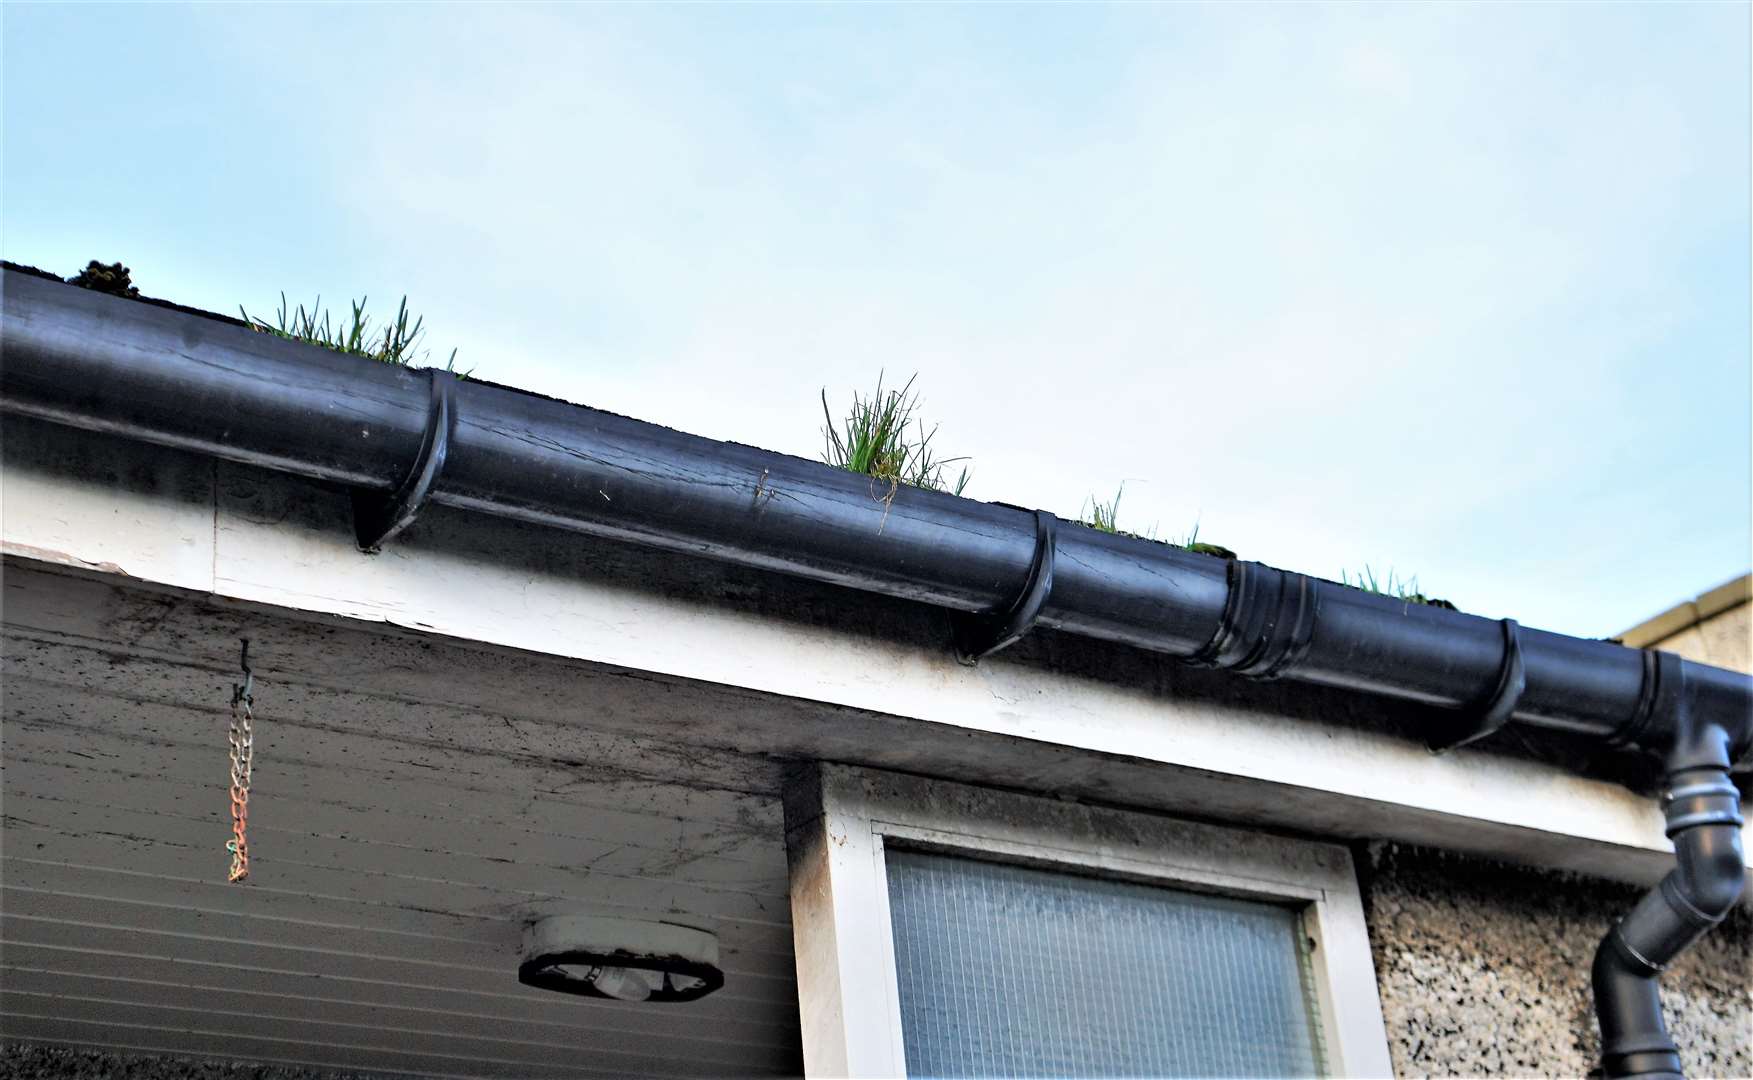 Weeds growing out of guttering.